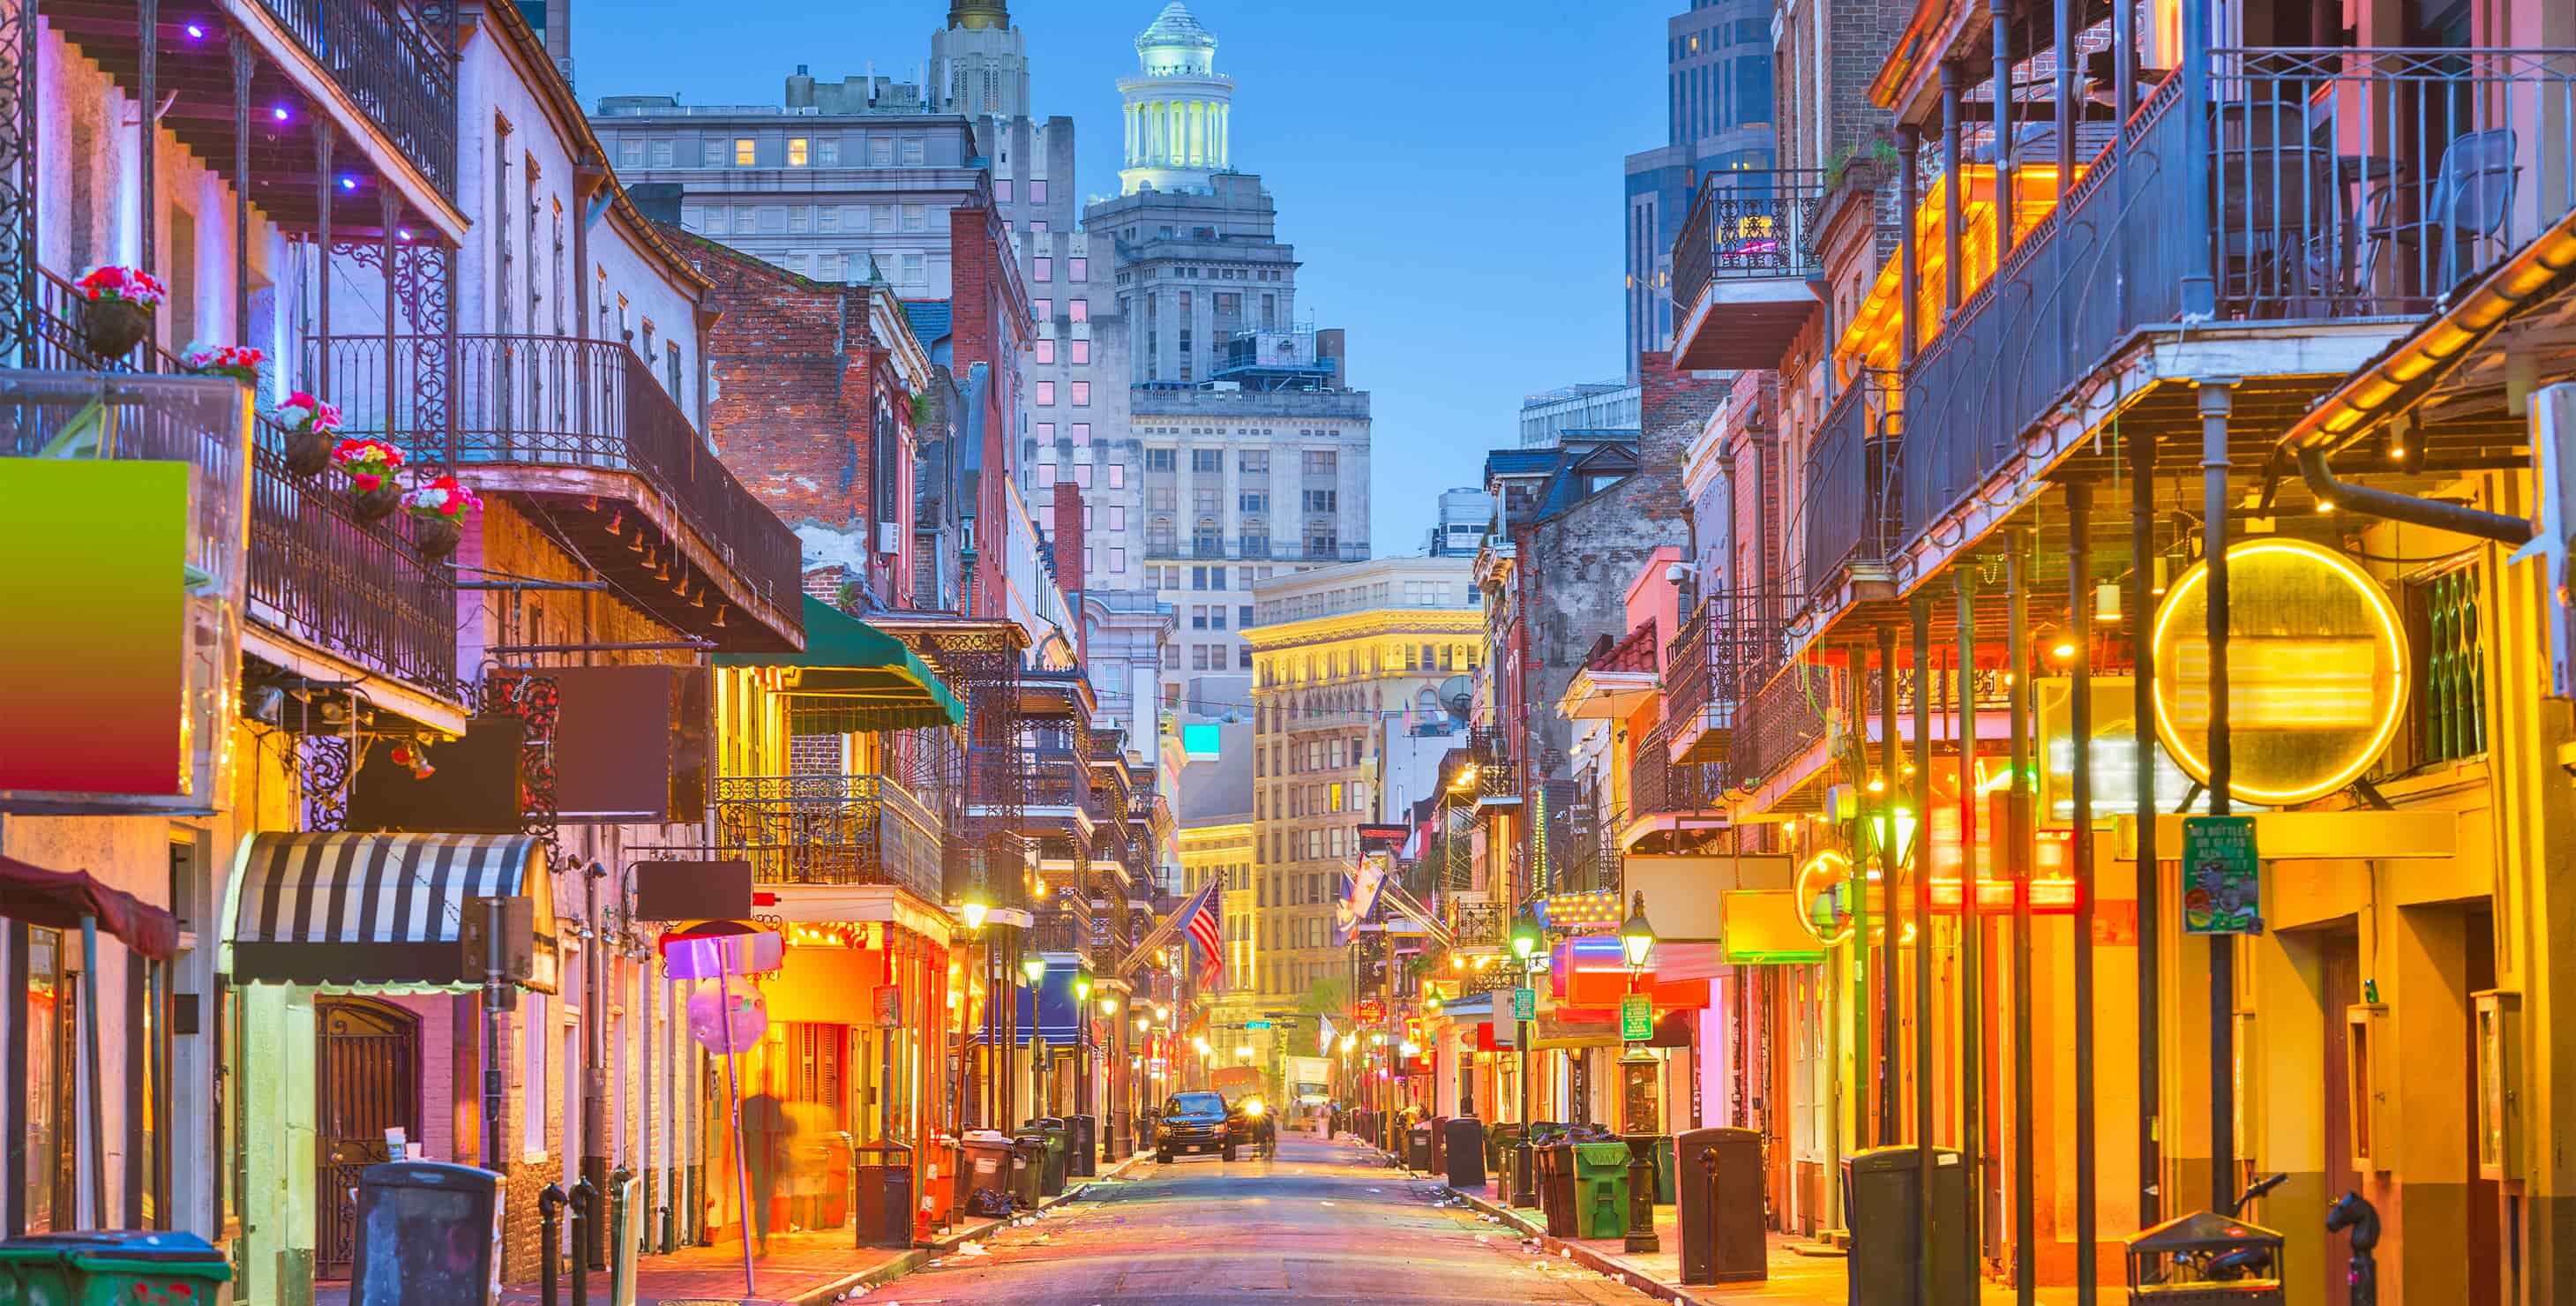 Bourbon Street Offers Tons of New Orleans Activities